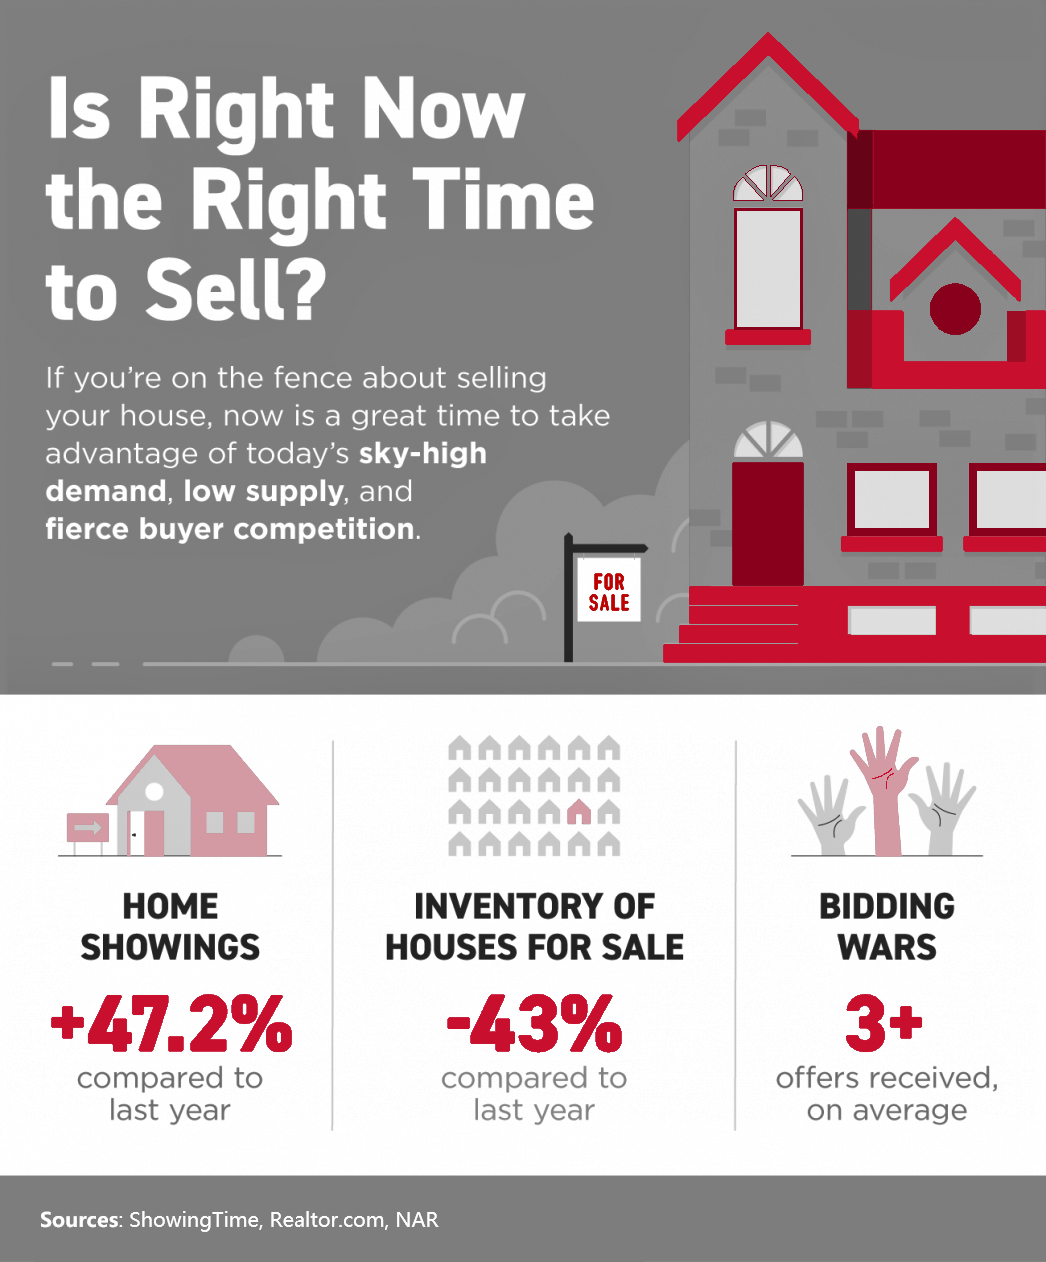 Should You Sell Your House Now?